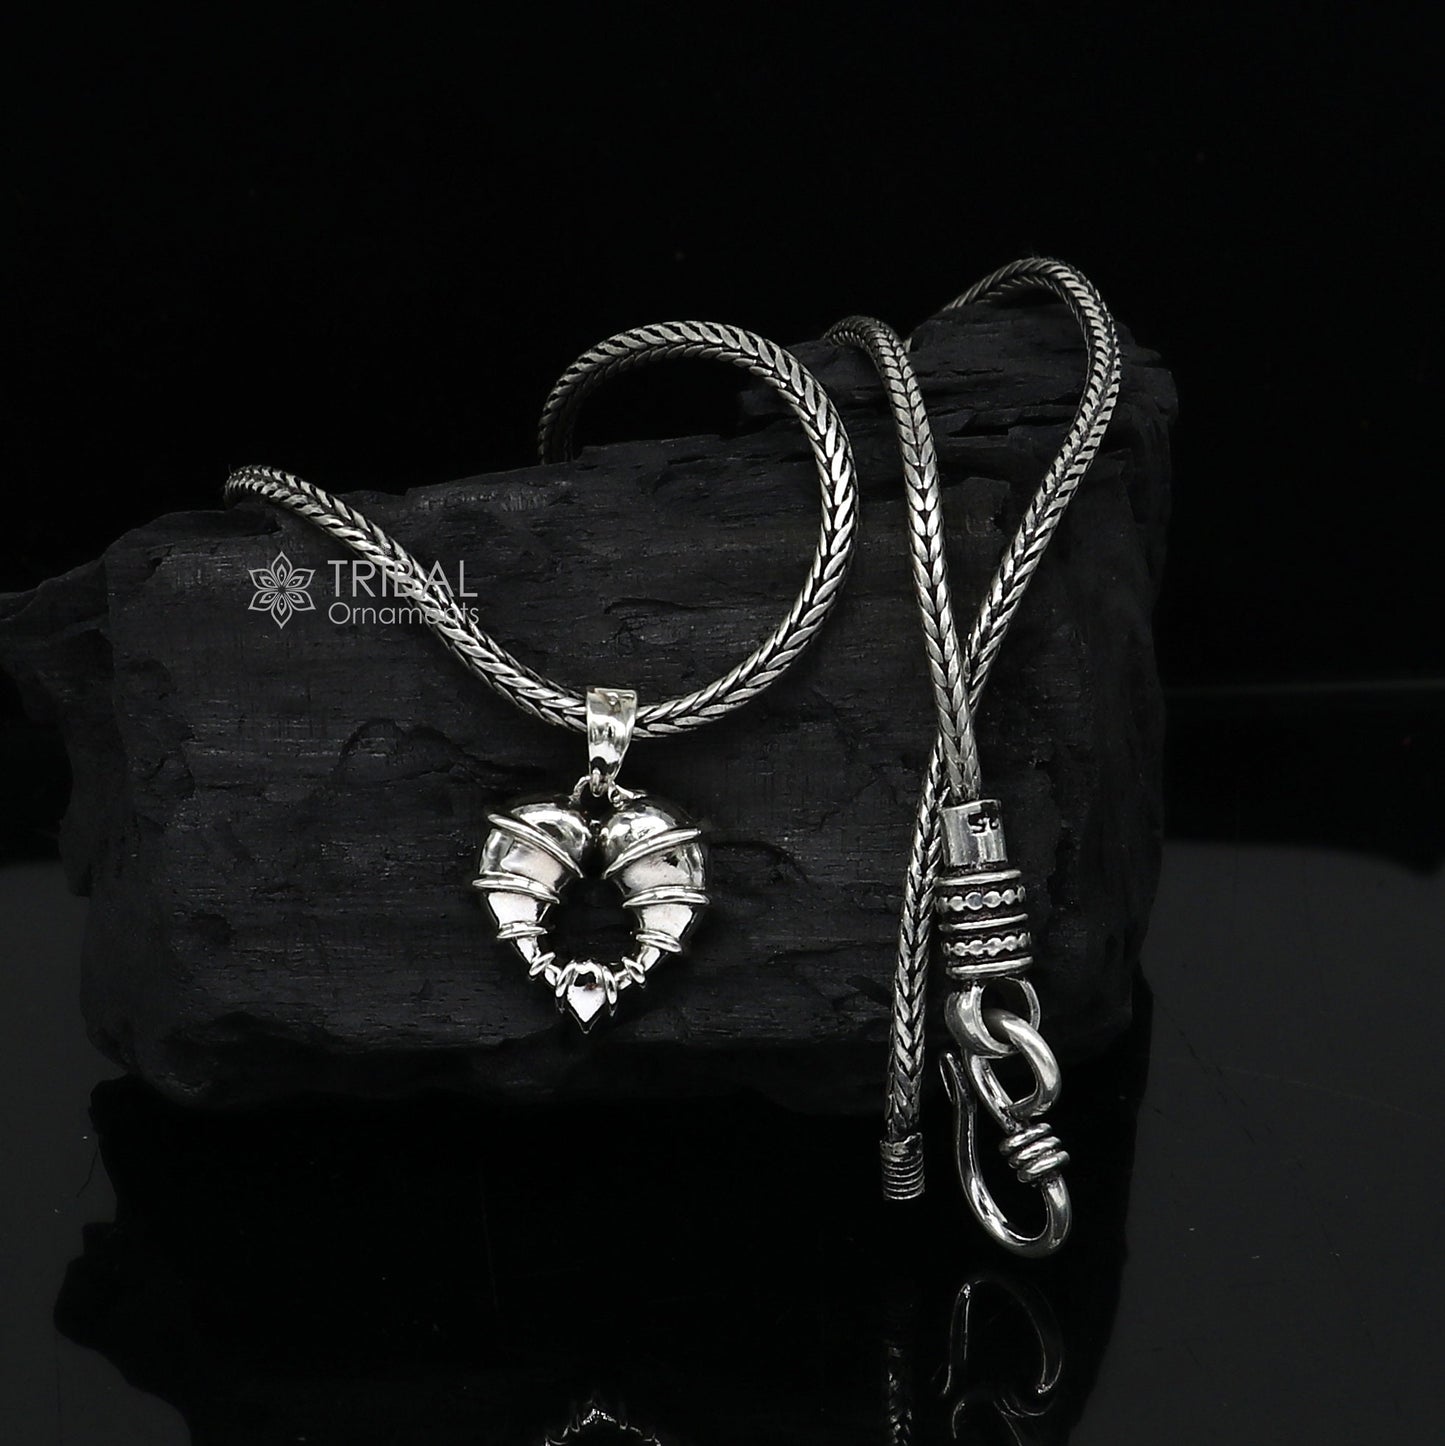 925 sterling silver unique design heart shape pendant necklace locket best gifting jewelry  Nsp710 - TRIBAL ORNAMENTS